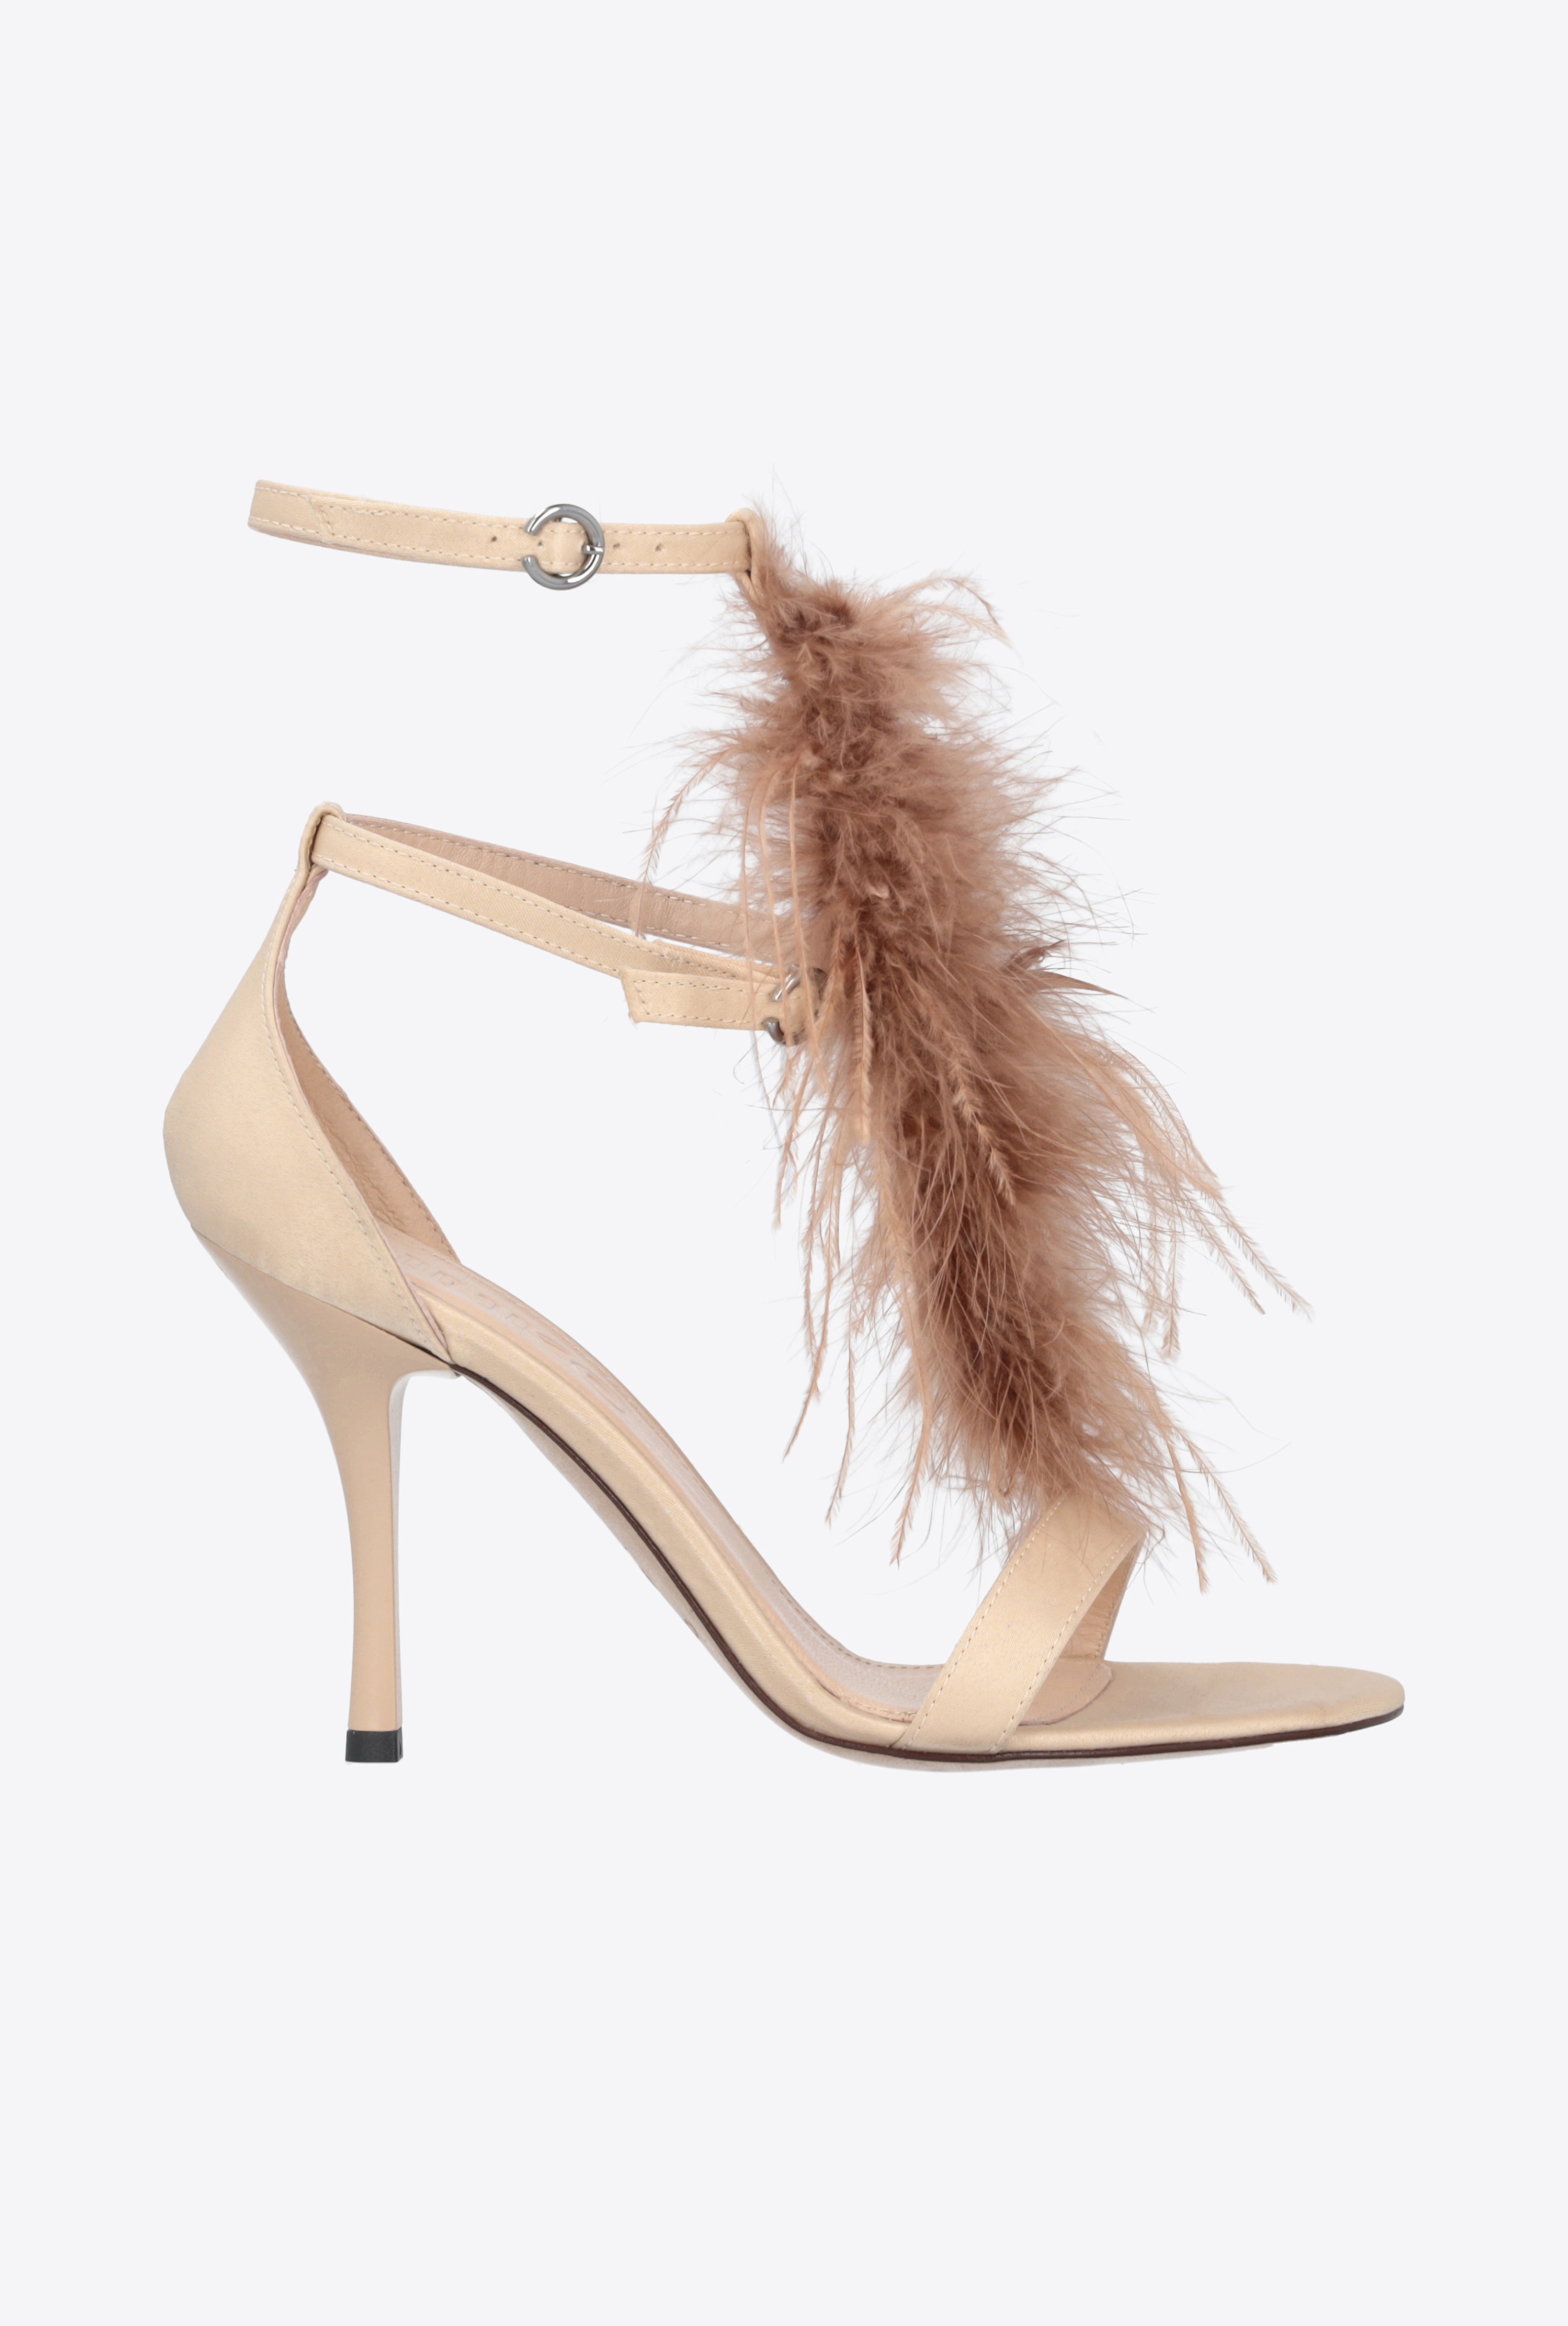 SANDALS WITH FEATHERS - 1